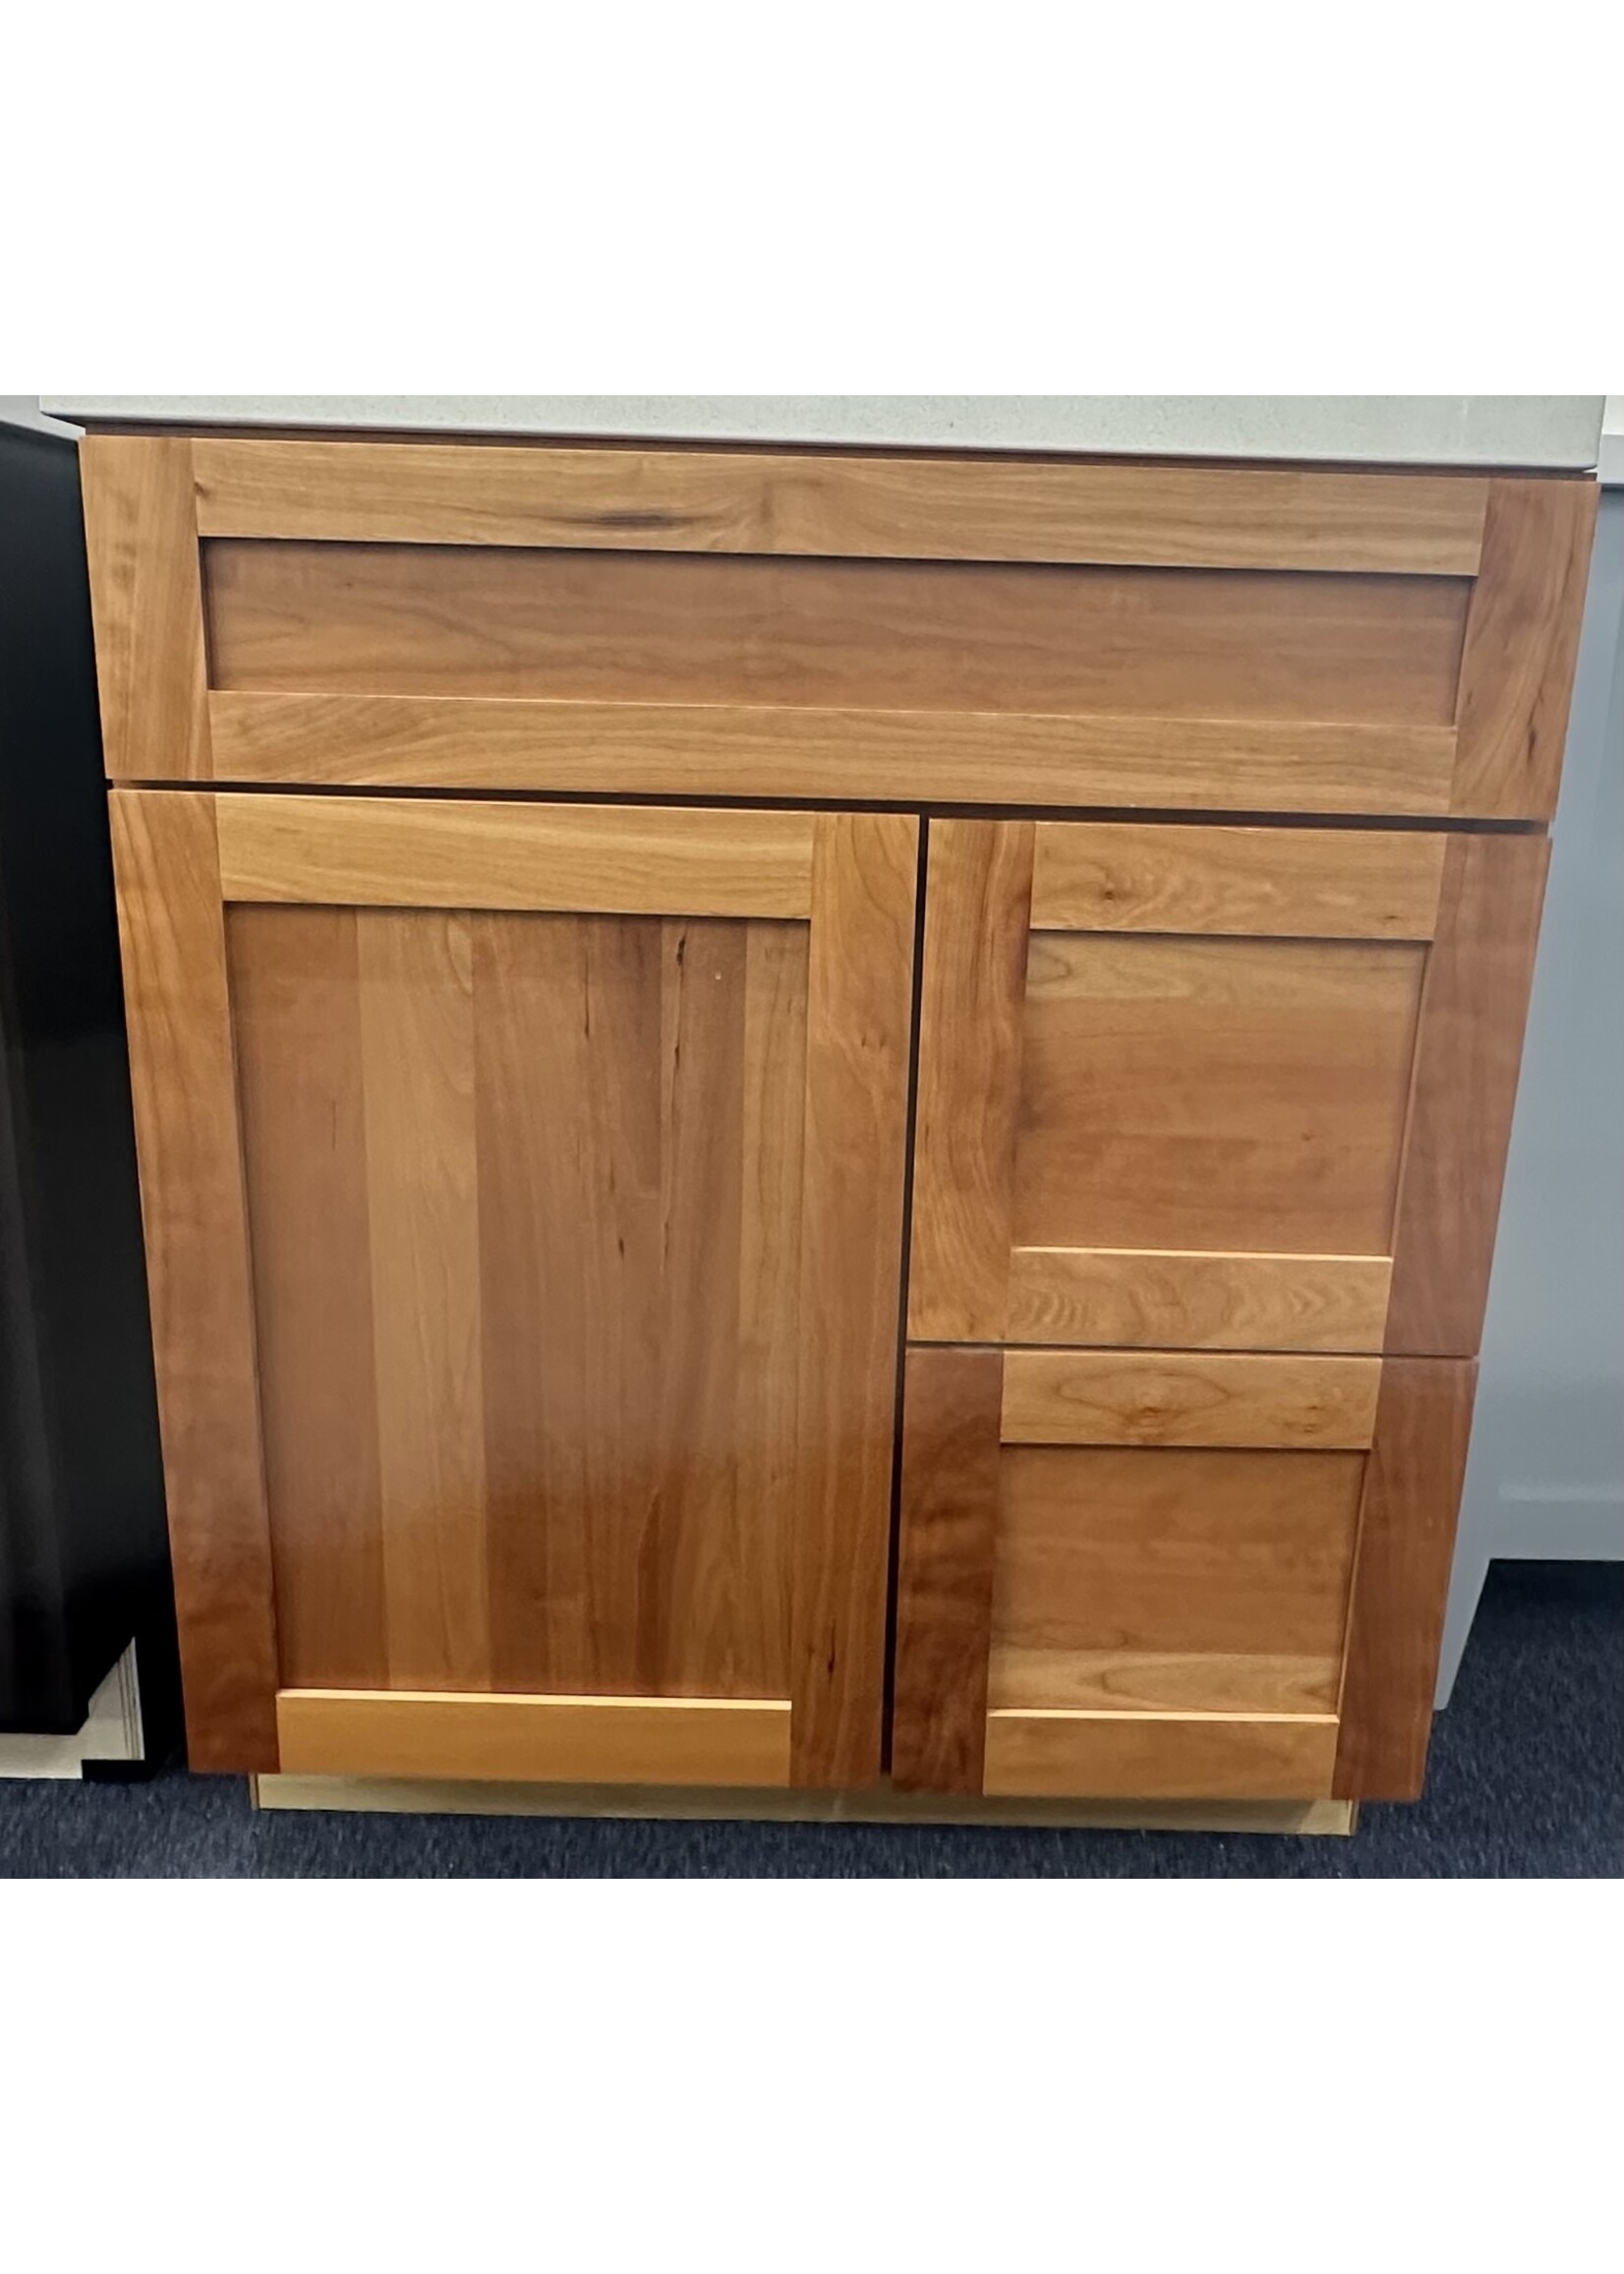 Omega Omega Cabinetry 30 X 21 X 34.5 Plainfield Doorstyle Cherry Wood Species Vanity W/Side Drawers - Natural Finish